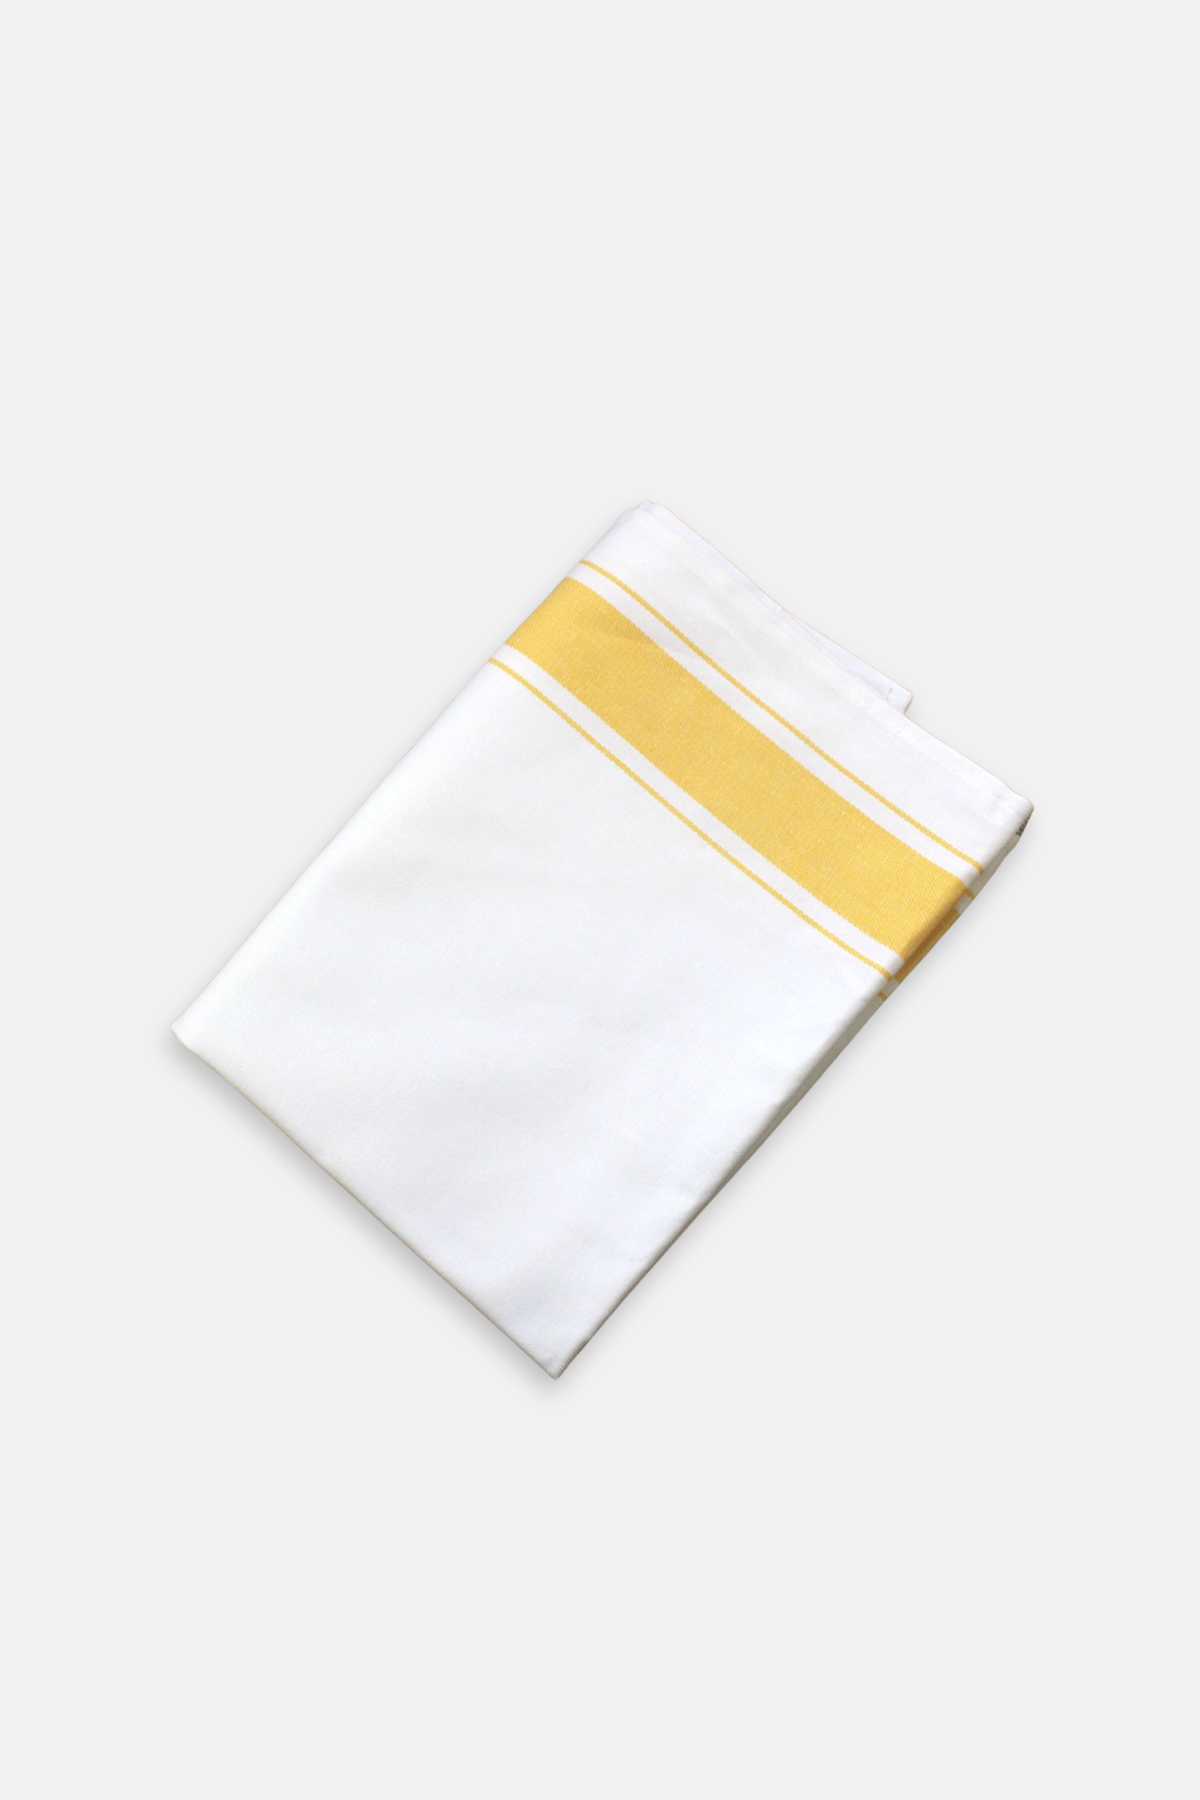 Absorbent Yellow Kitchen Towel